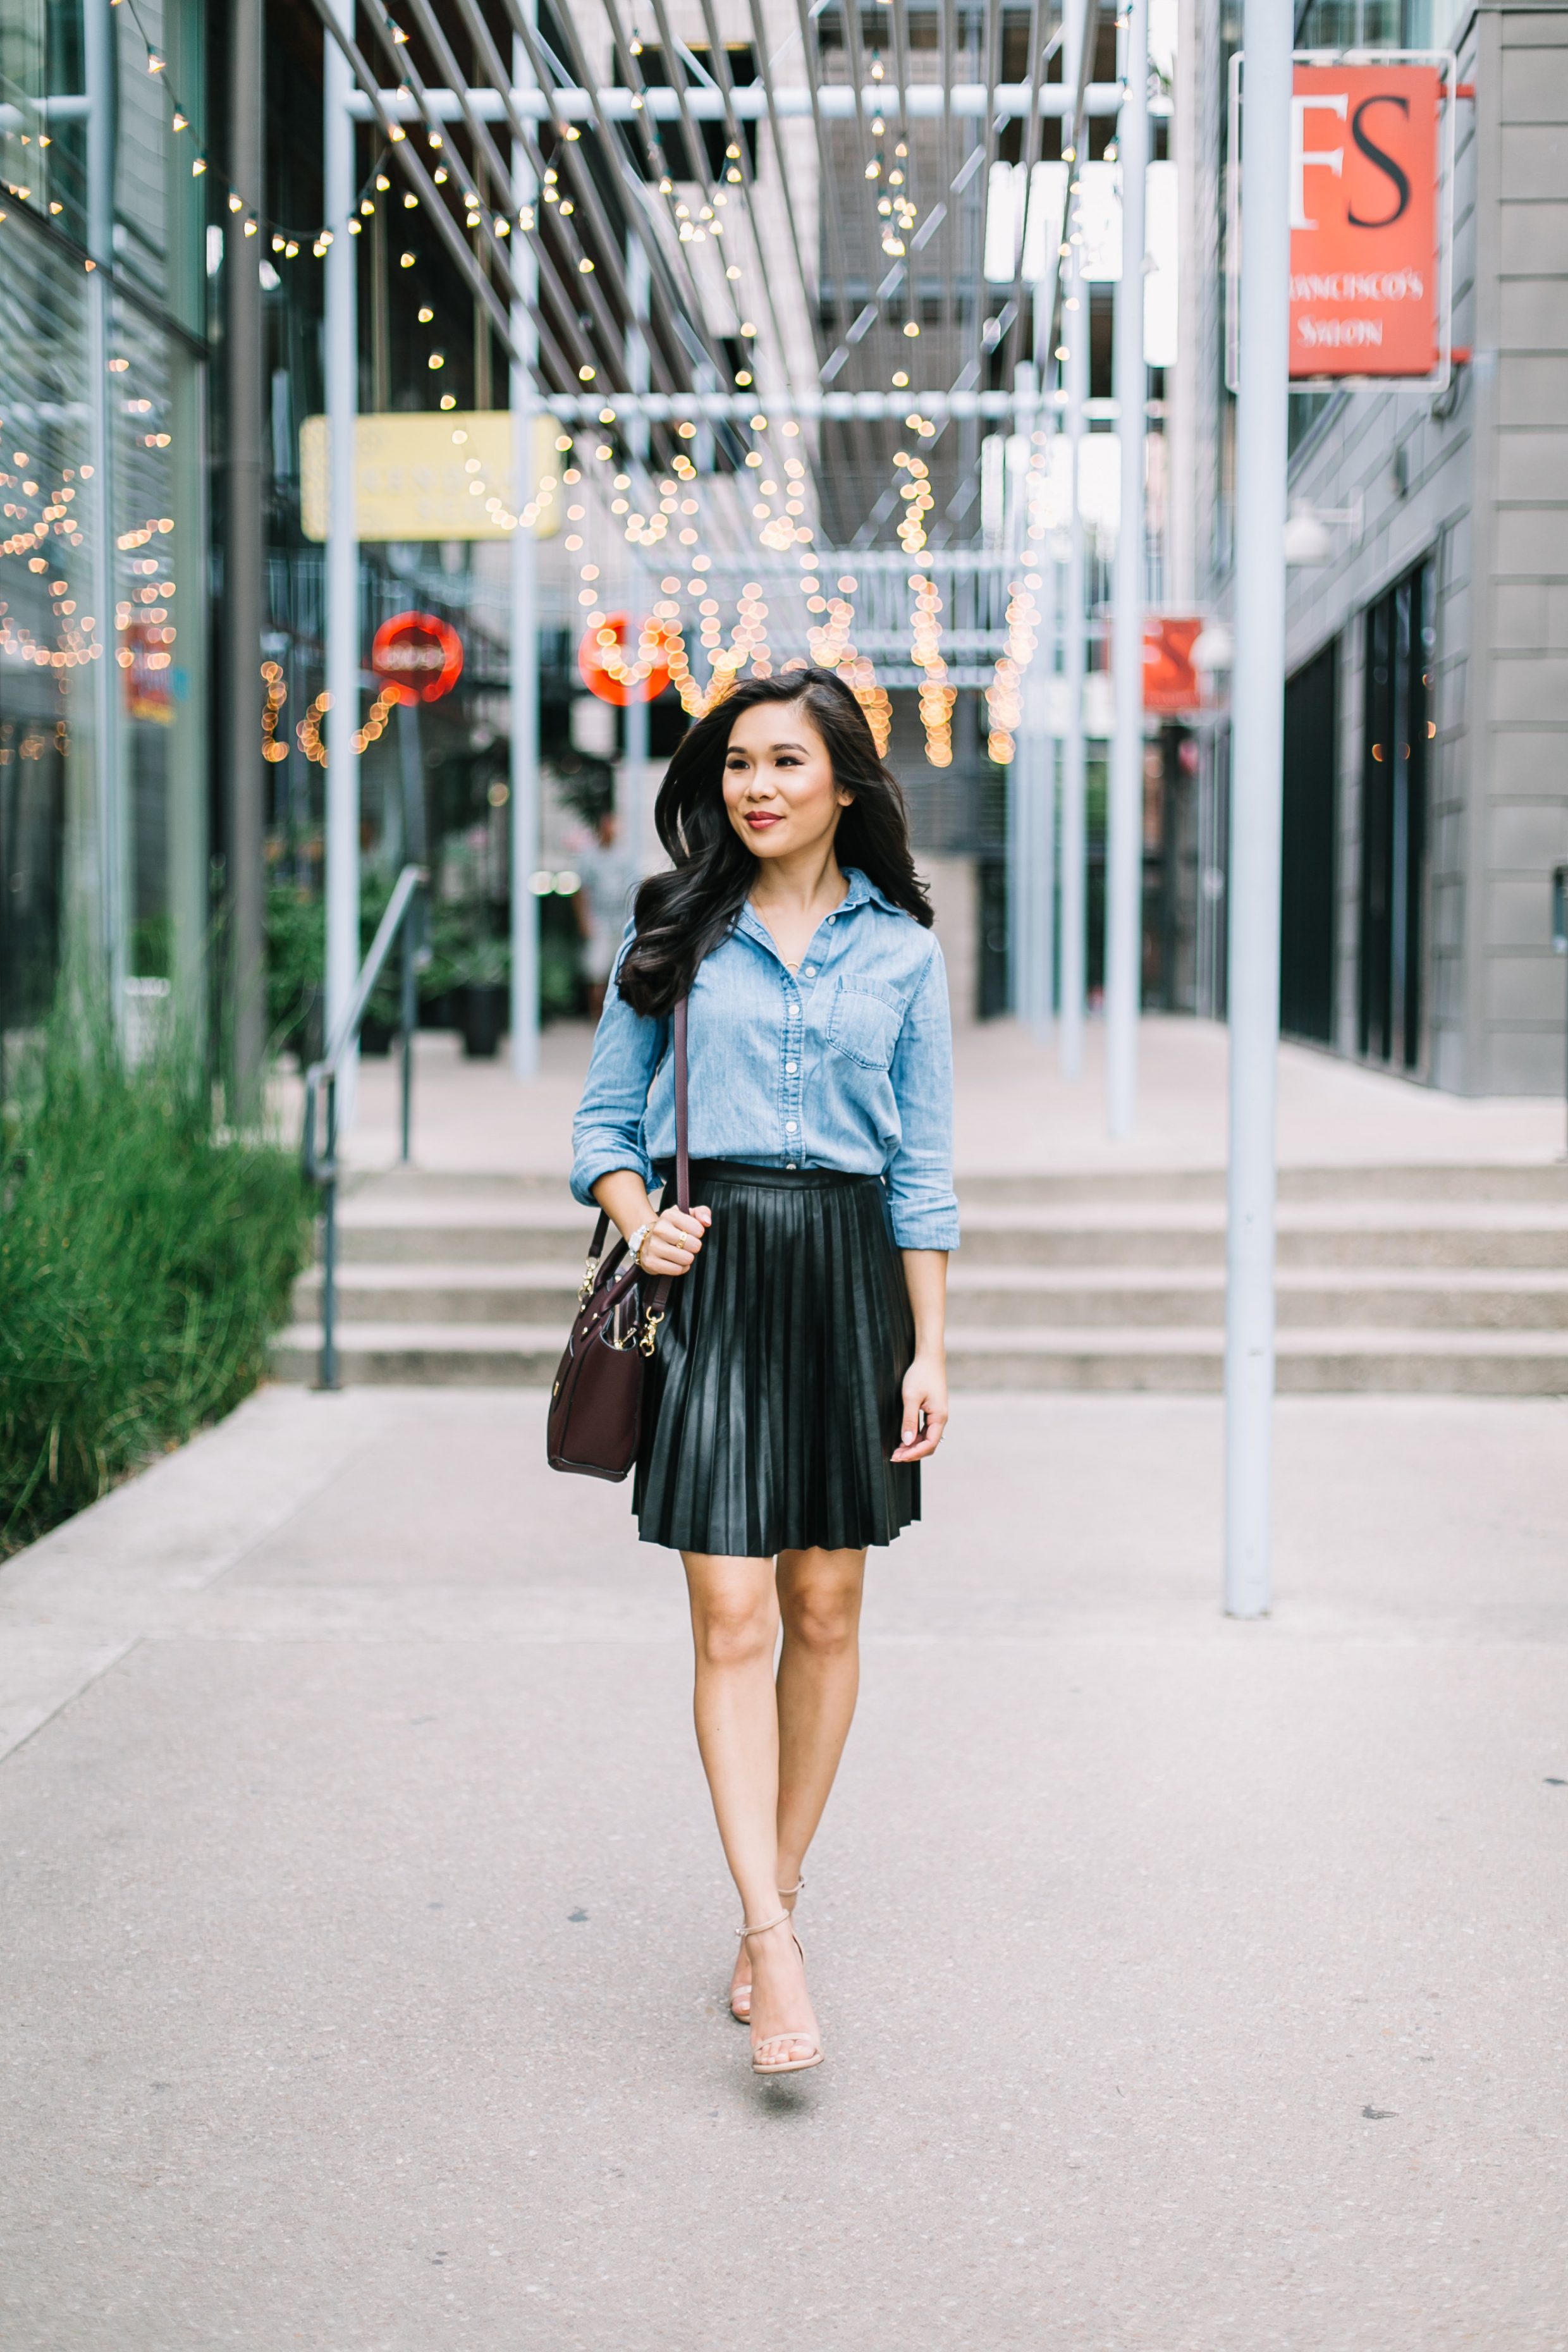 Austin during Fall :: Pleated Leather Skirt - Color & Chic